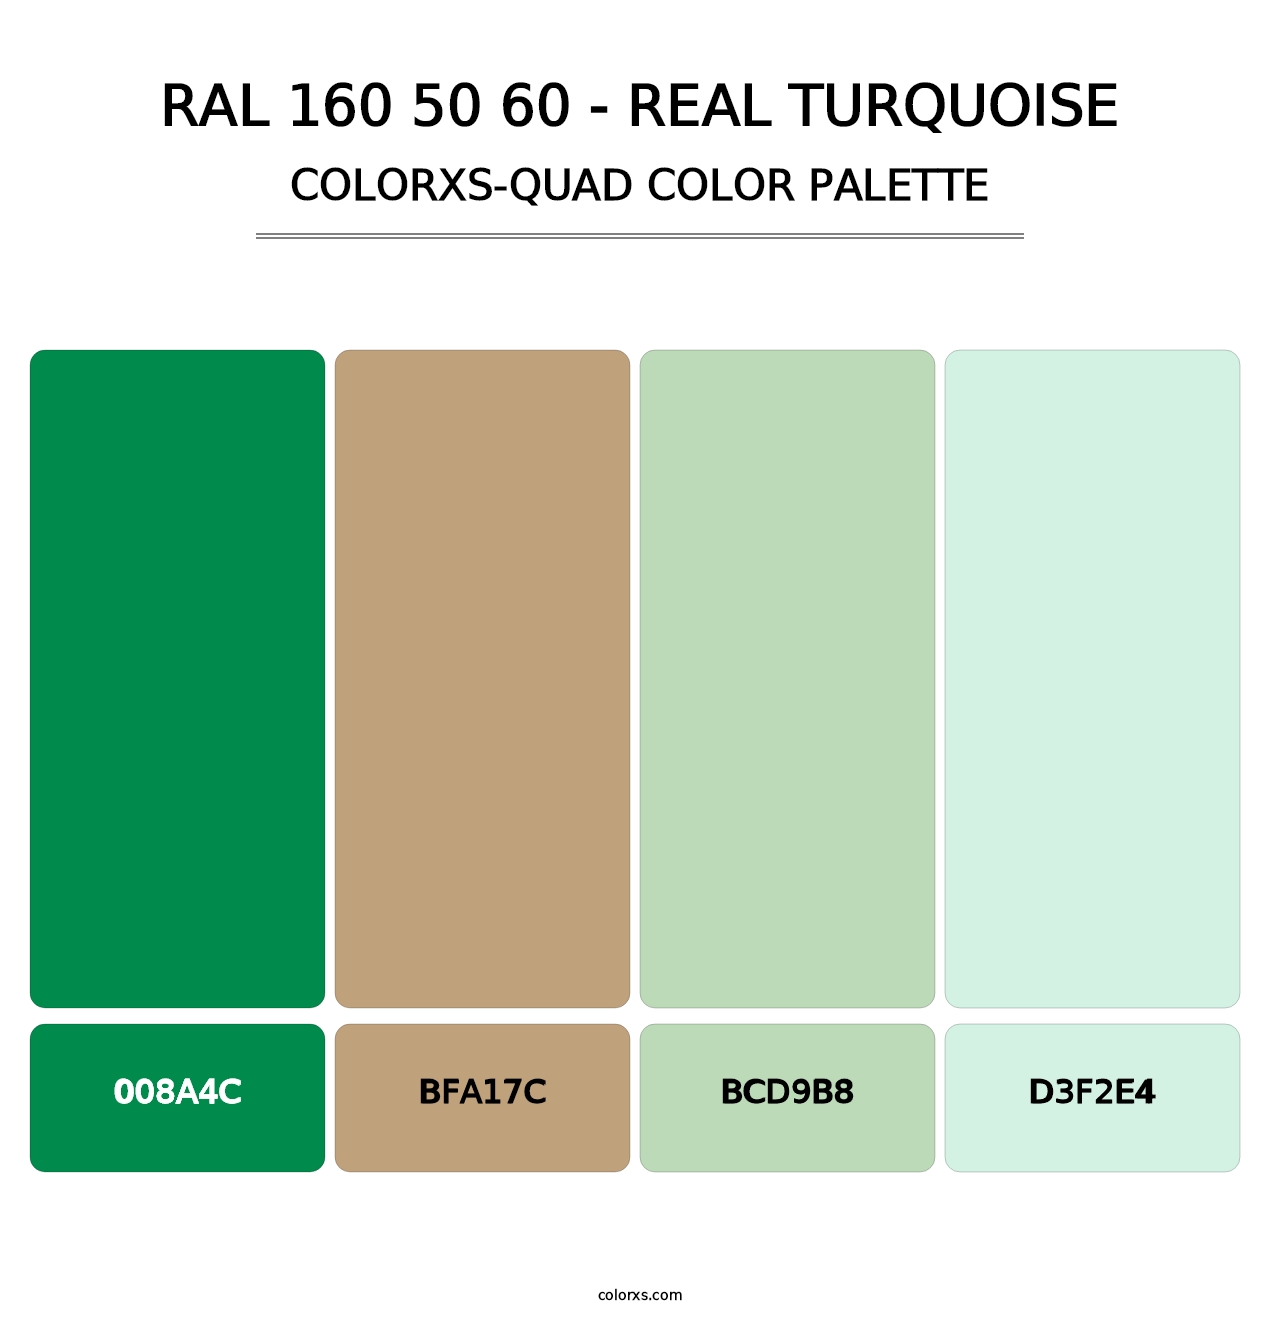 RAL 160 50 60 - Real Turquoise - Colorxs Quad Palette